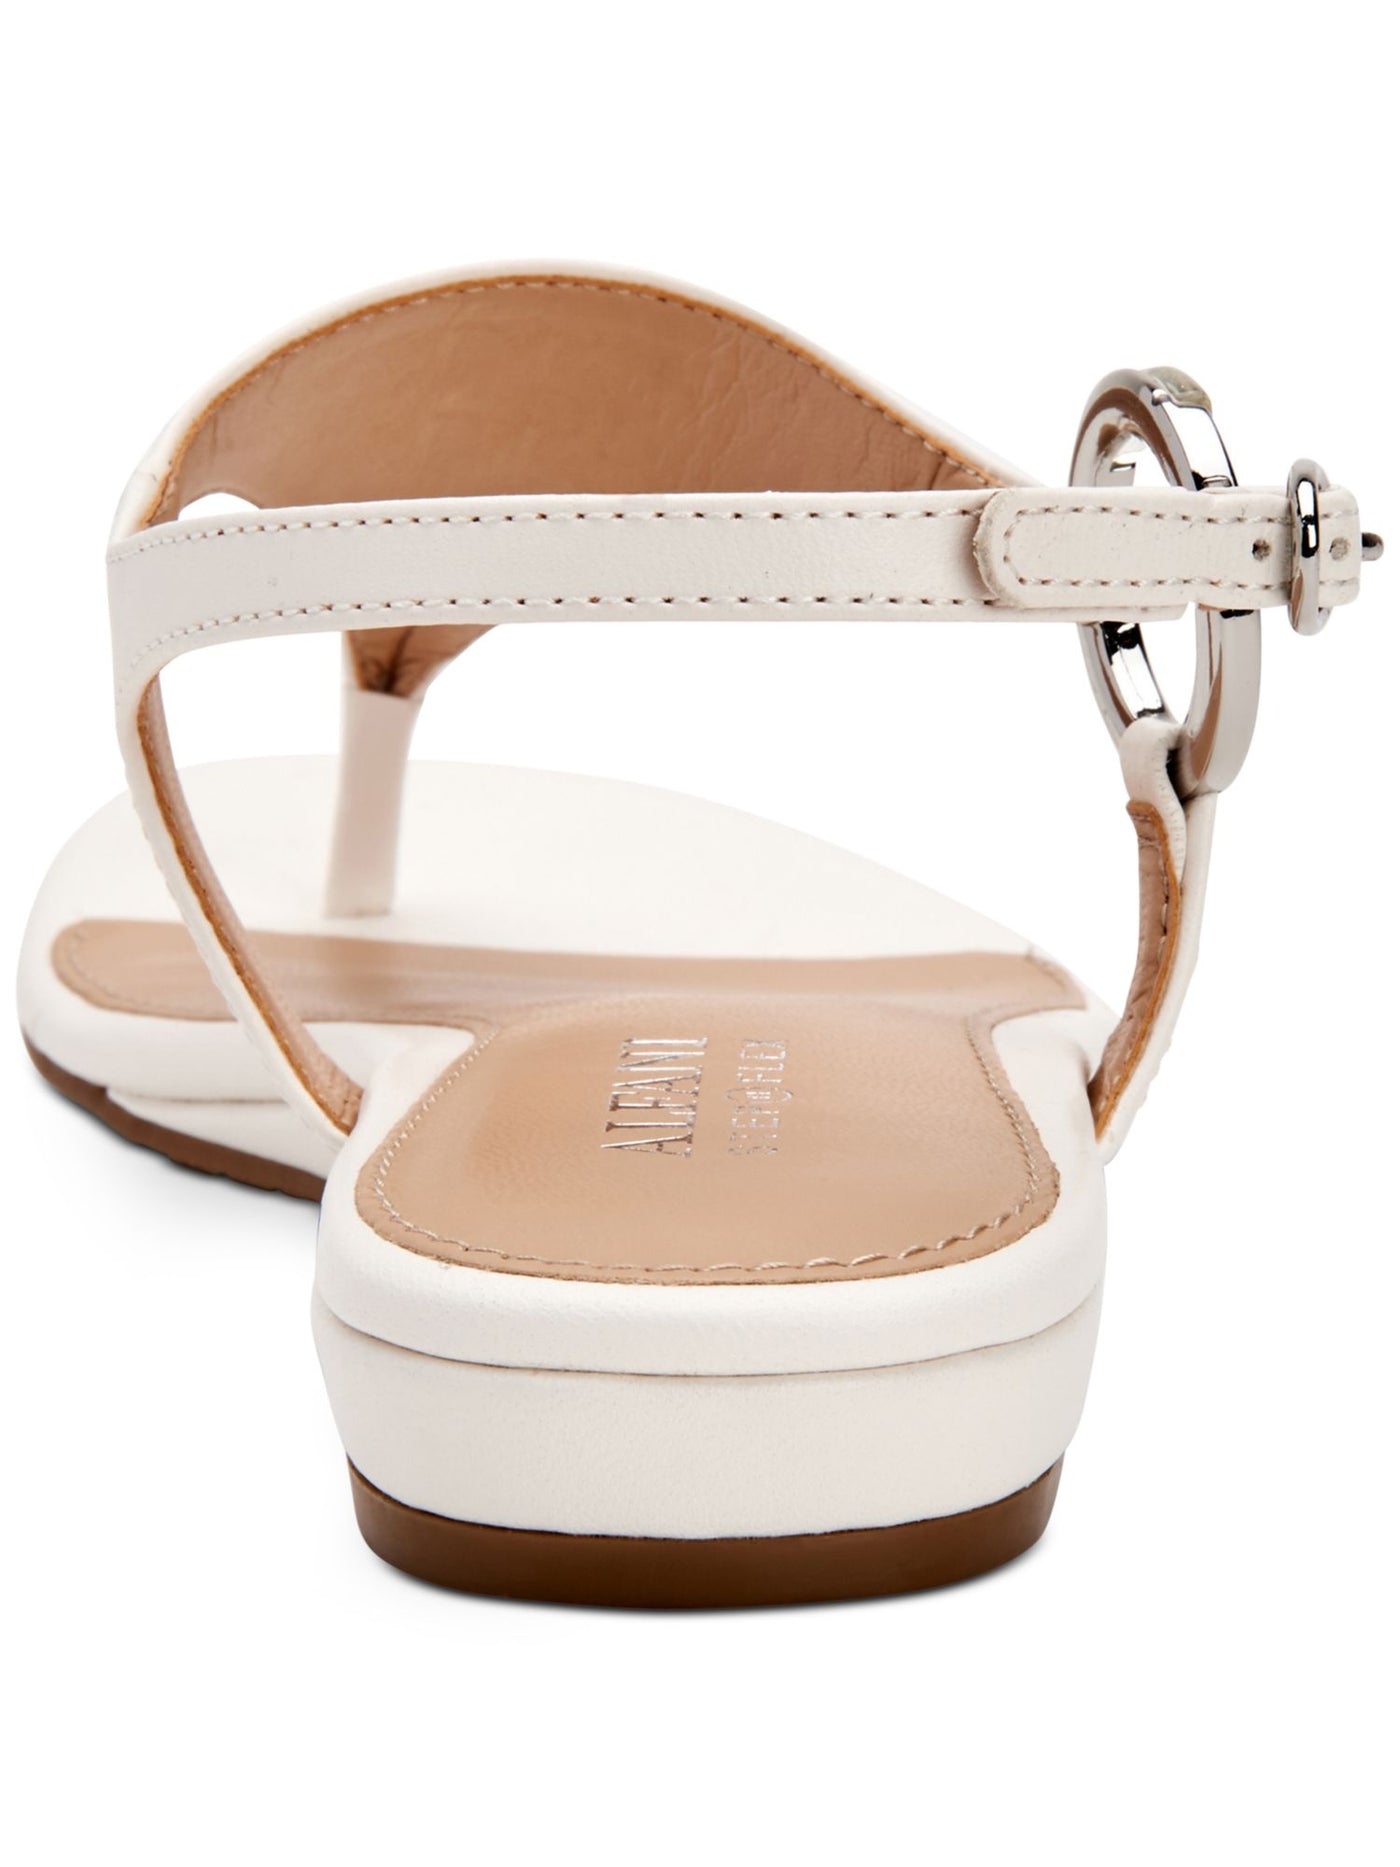 ALFANI Womens White Ring Hardware Shield Hayyden Round Toe Buckle Thong Sandals Shoes 5.5 M